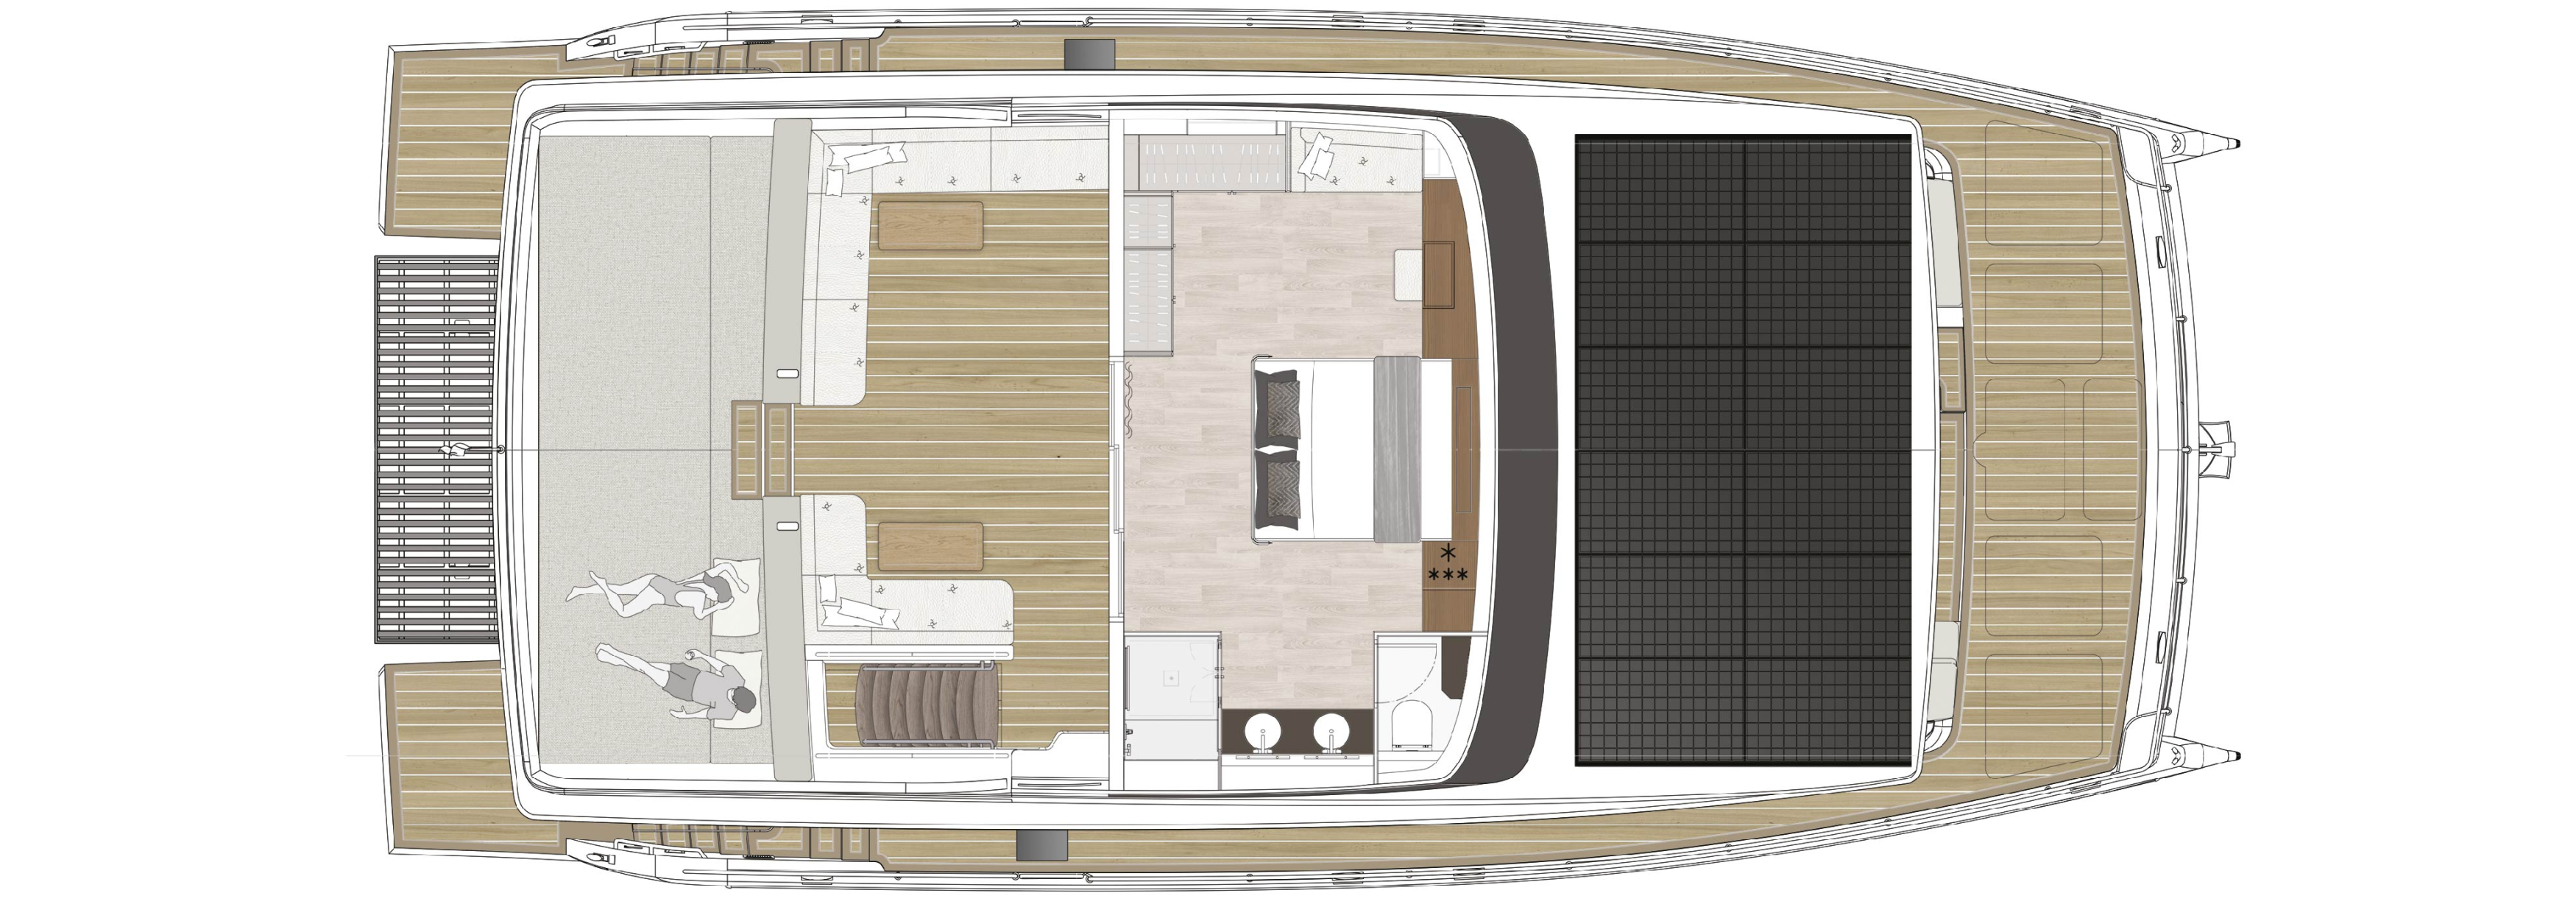 Yacht owners suite plane